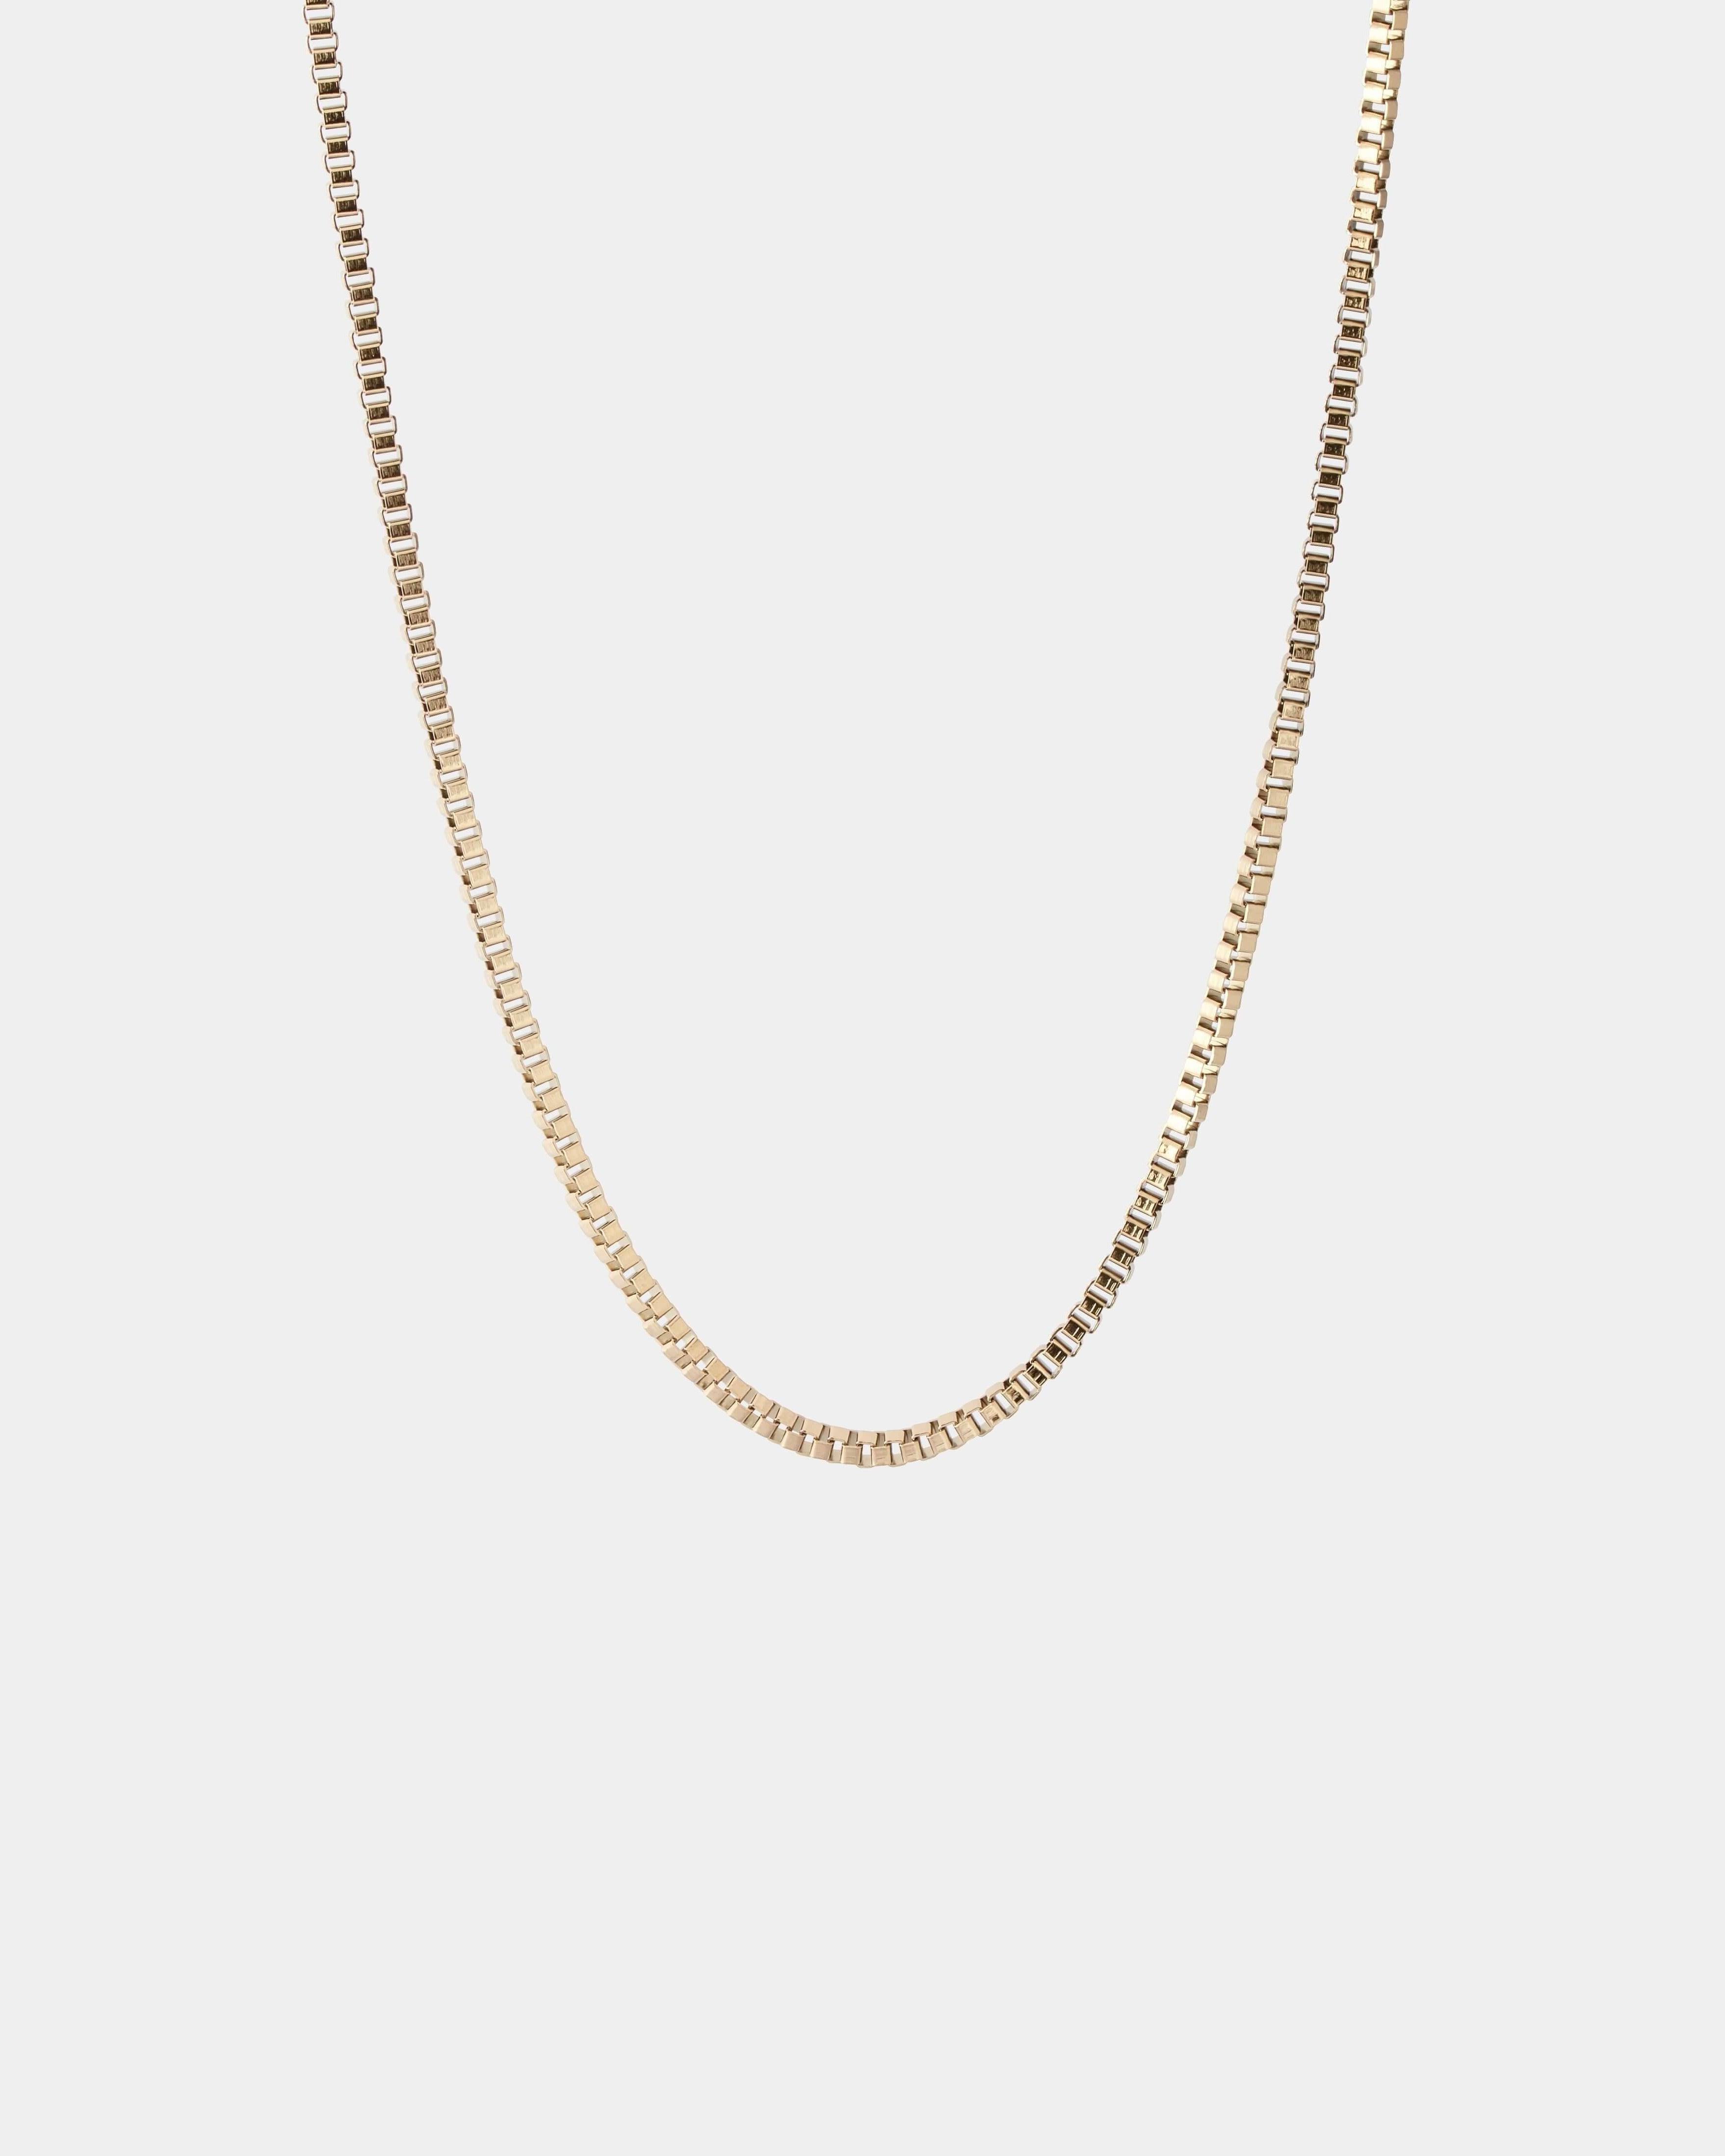 VENETIAN CHAIN NECKLACE - LIMELY